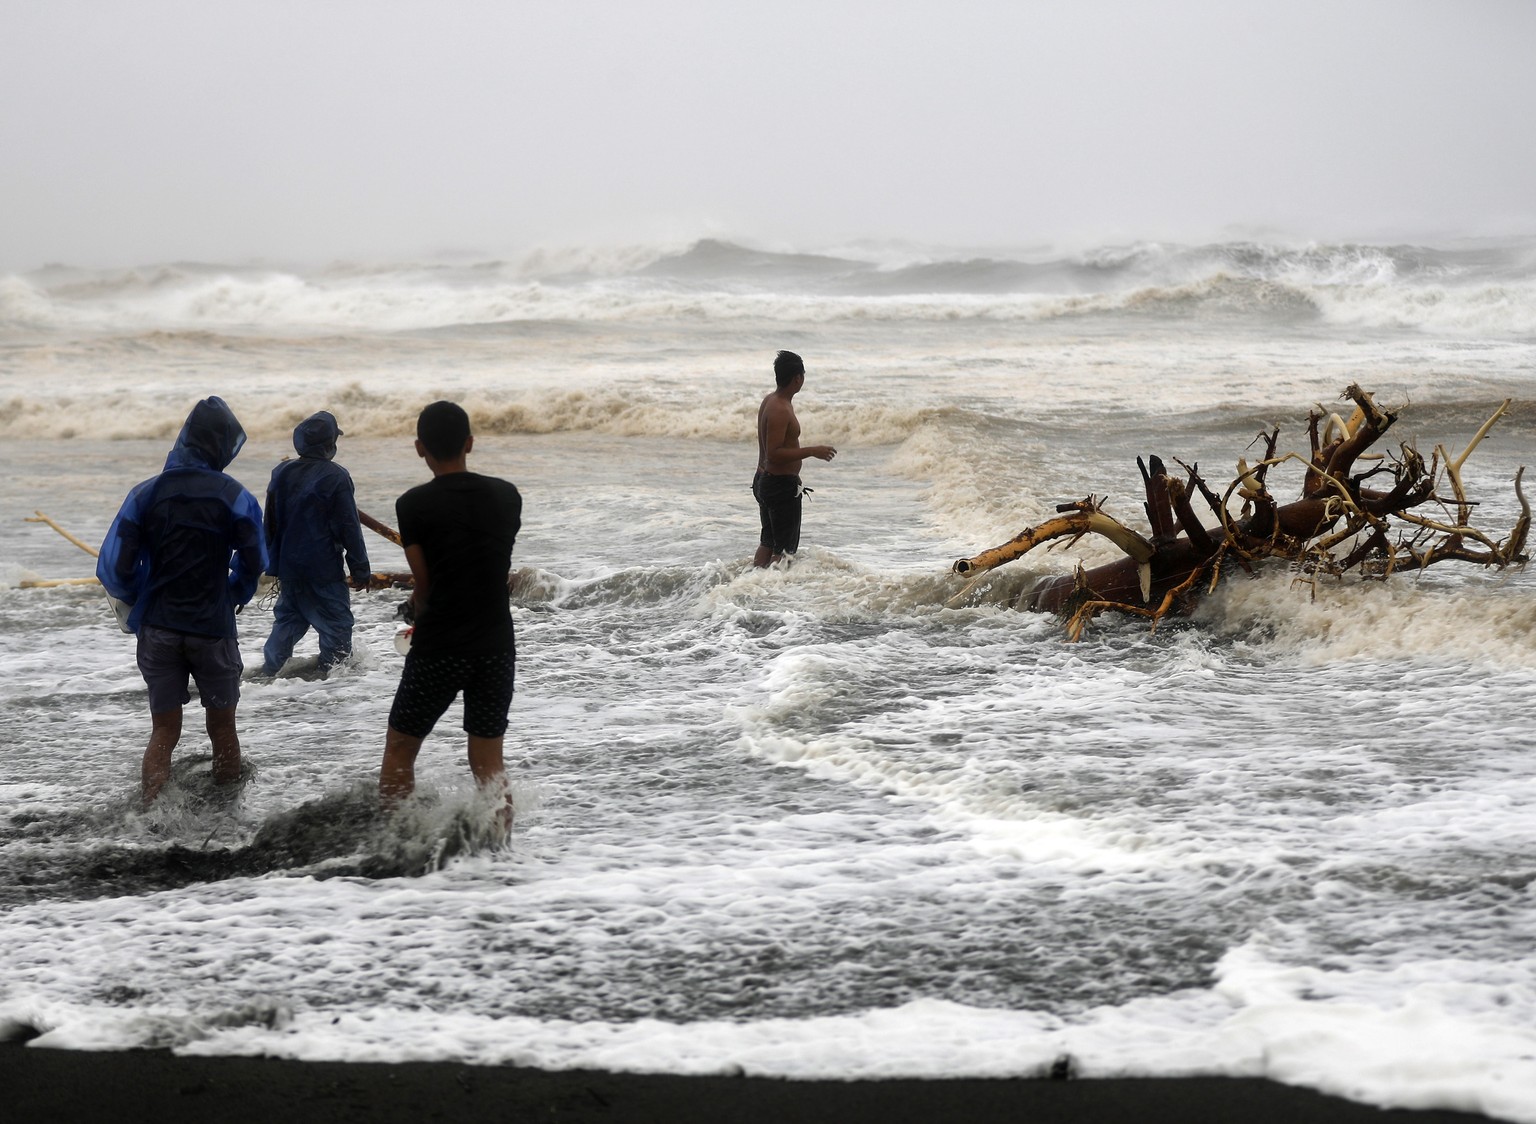 epa07021364 Filipinos frolic on waves in the typhoon-hit town of Aparri, Cagayan province, Philippines, 15 September 2018. Mangkhut, the most powerful typhoon to strike the Philippines in the last fiv ...